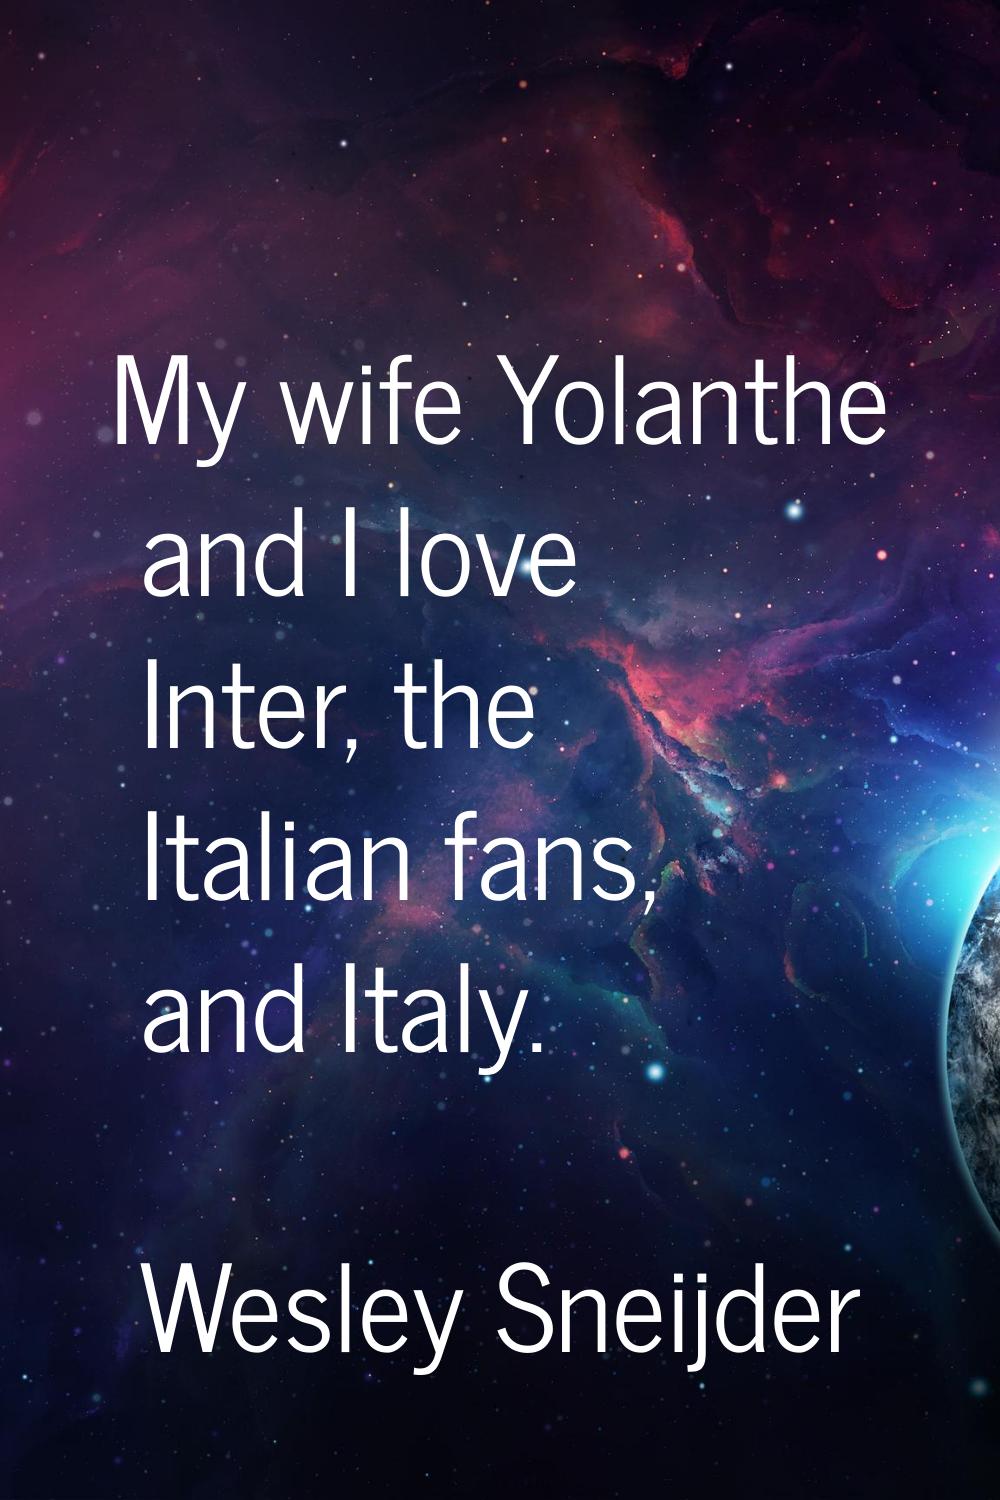 My wife Yolanthe and I love Inter, the Italian fans, and Italy.